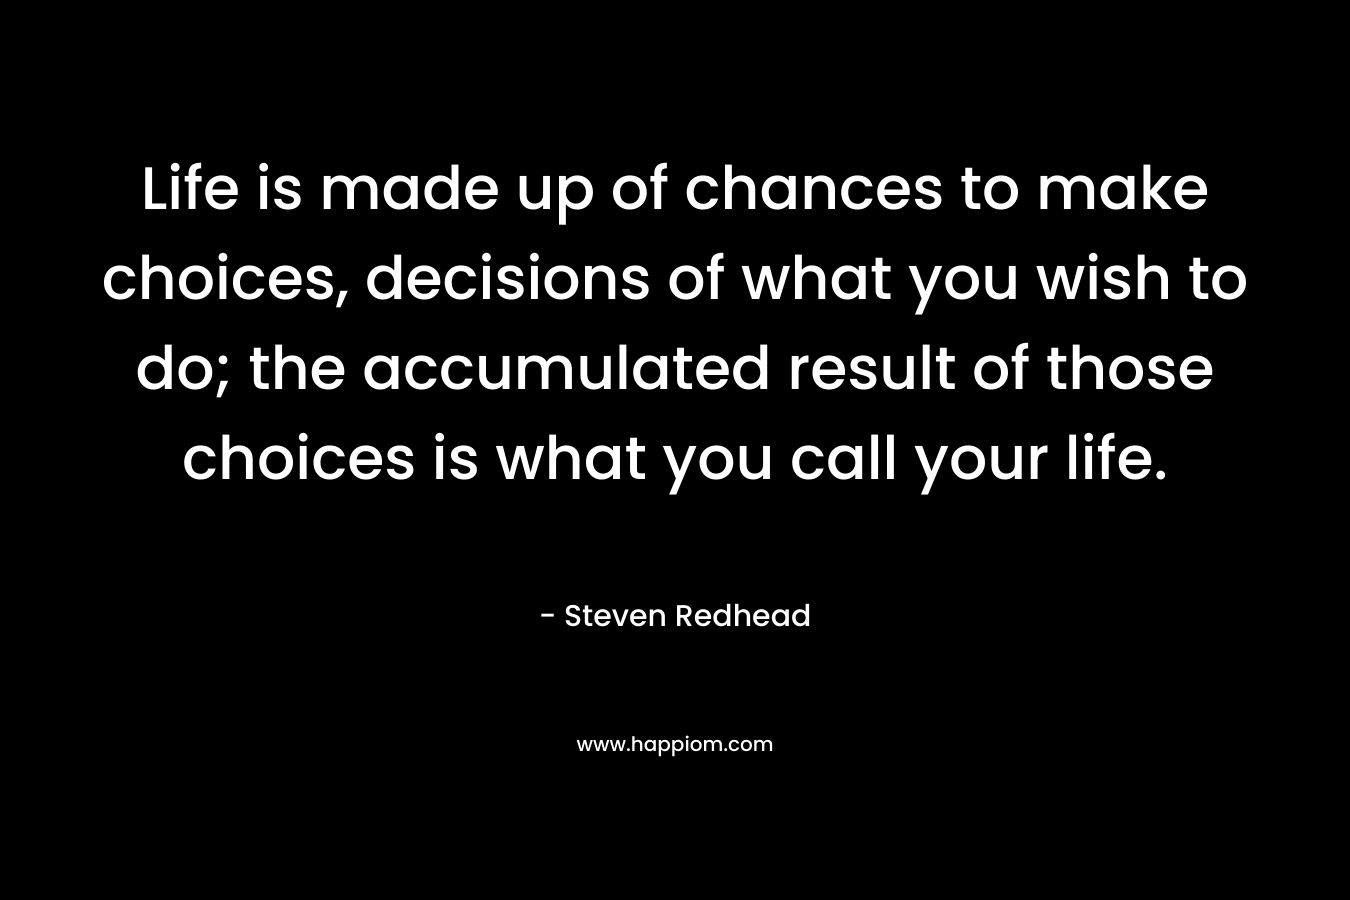 Life is made up of chances to make choices, decisions of what you wish to do; the accumulated result of those choices is what you call your life. – Steven Redhead